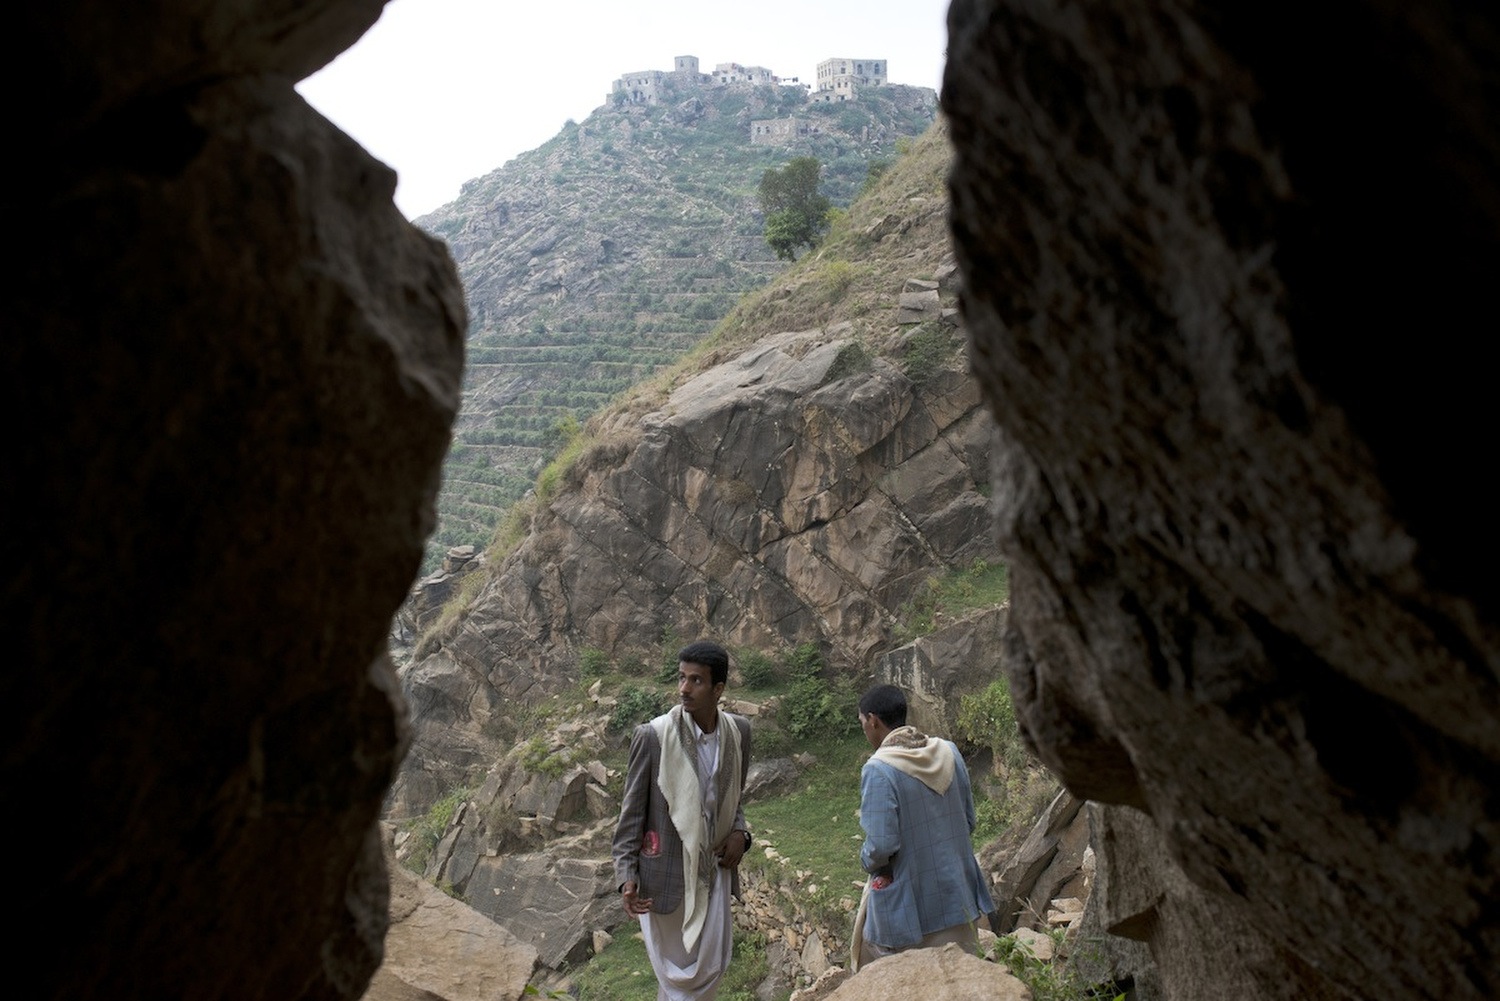 Yemeni men visit the pilgrimage site in the mountains of Marran, where Hussein Al Houthi was killed.